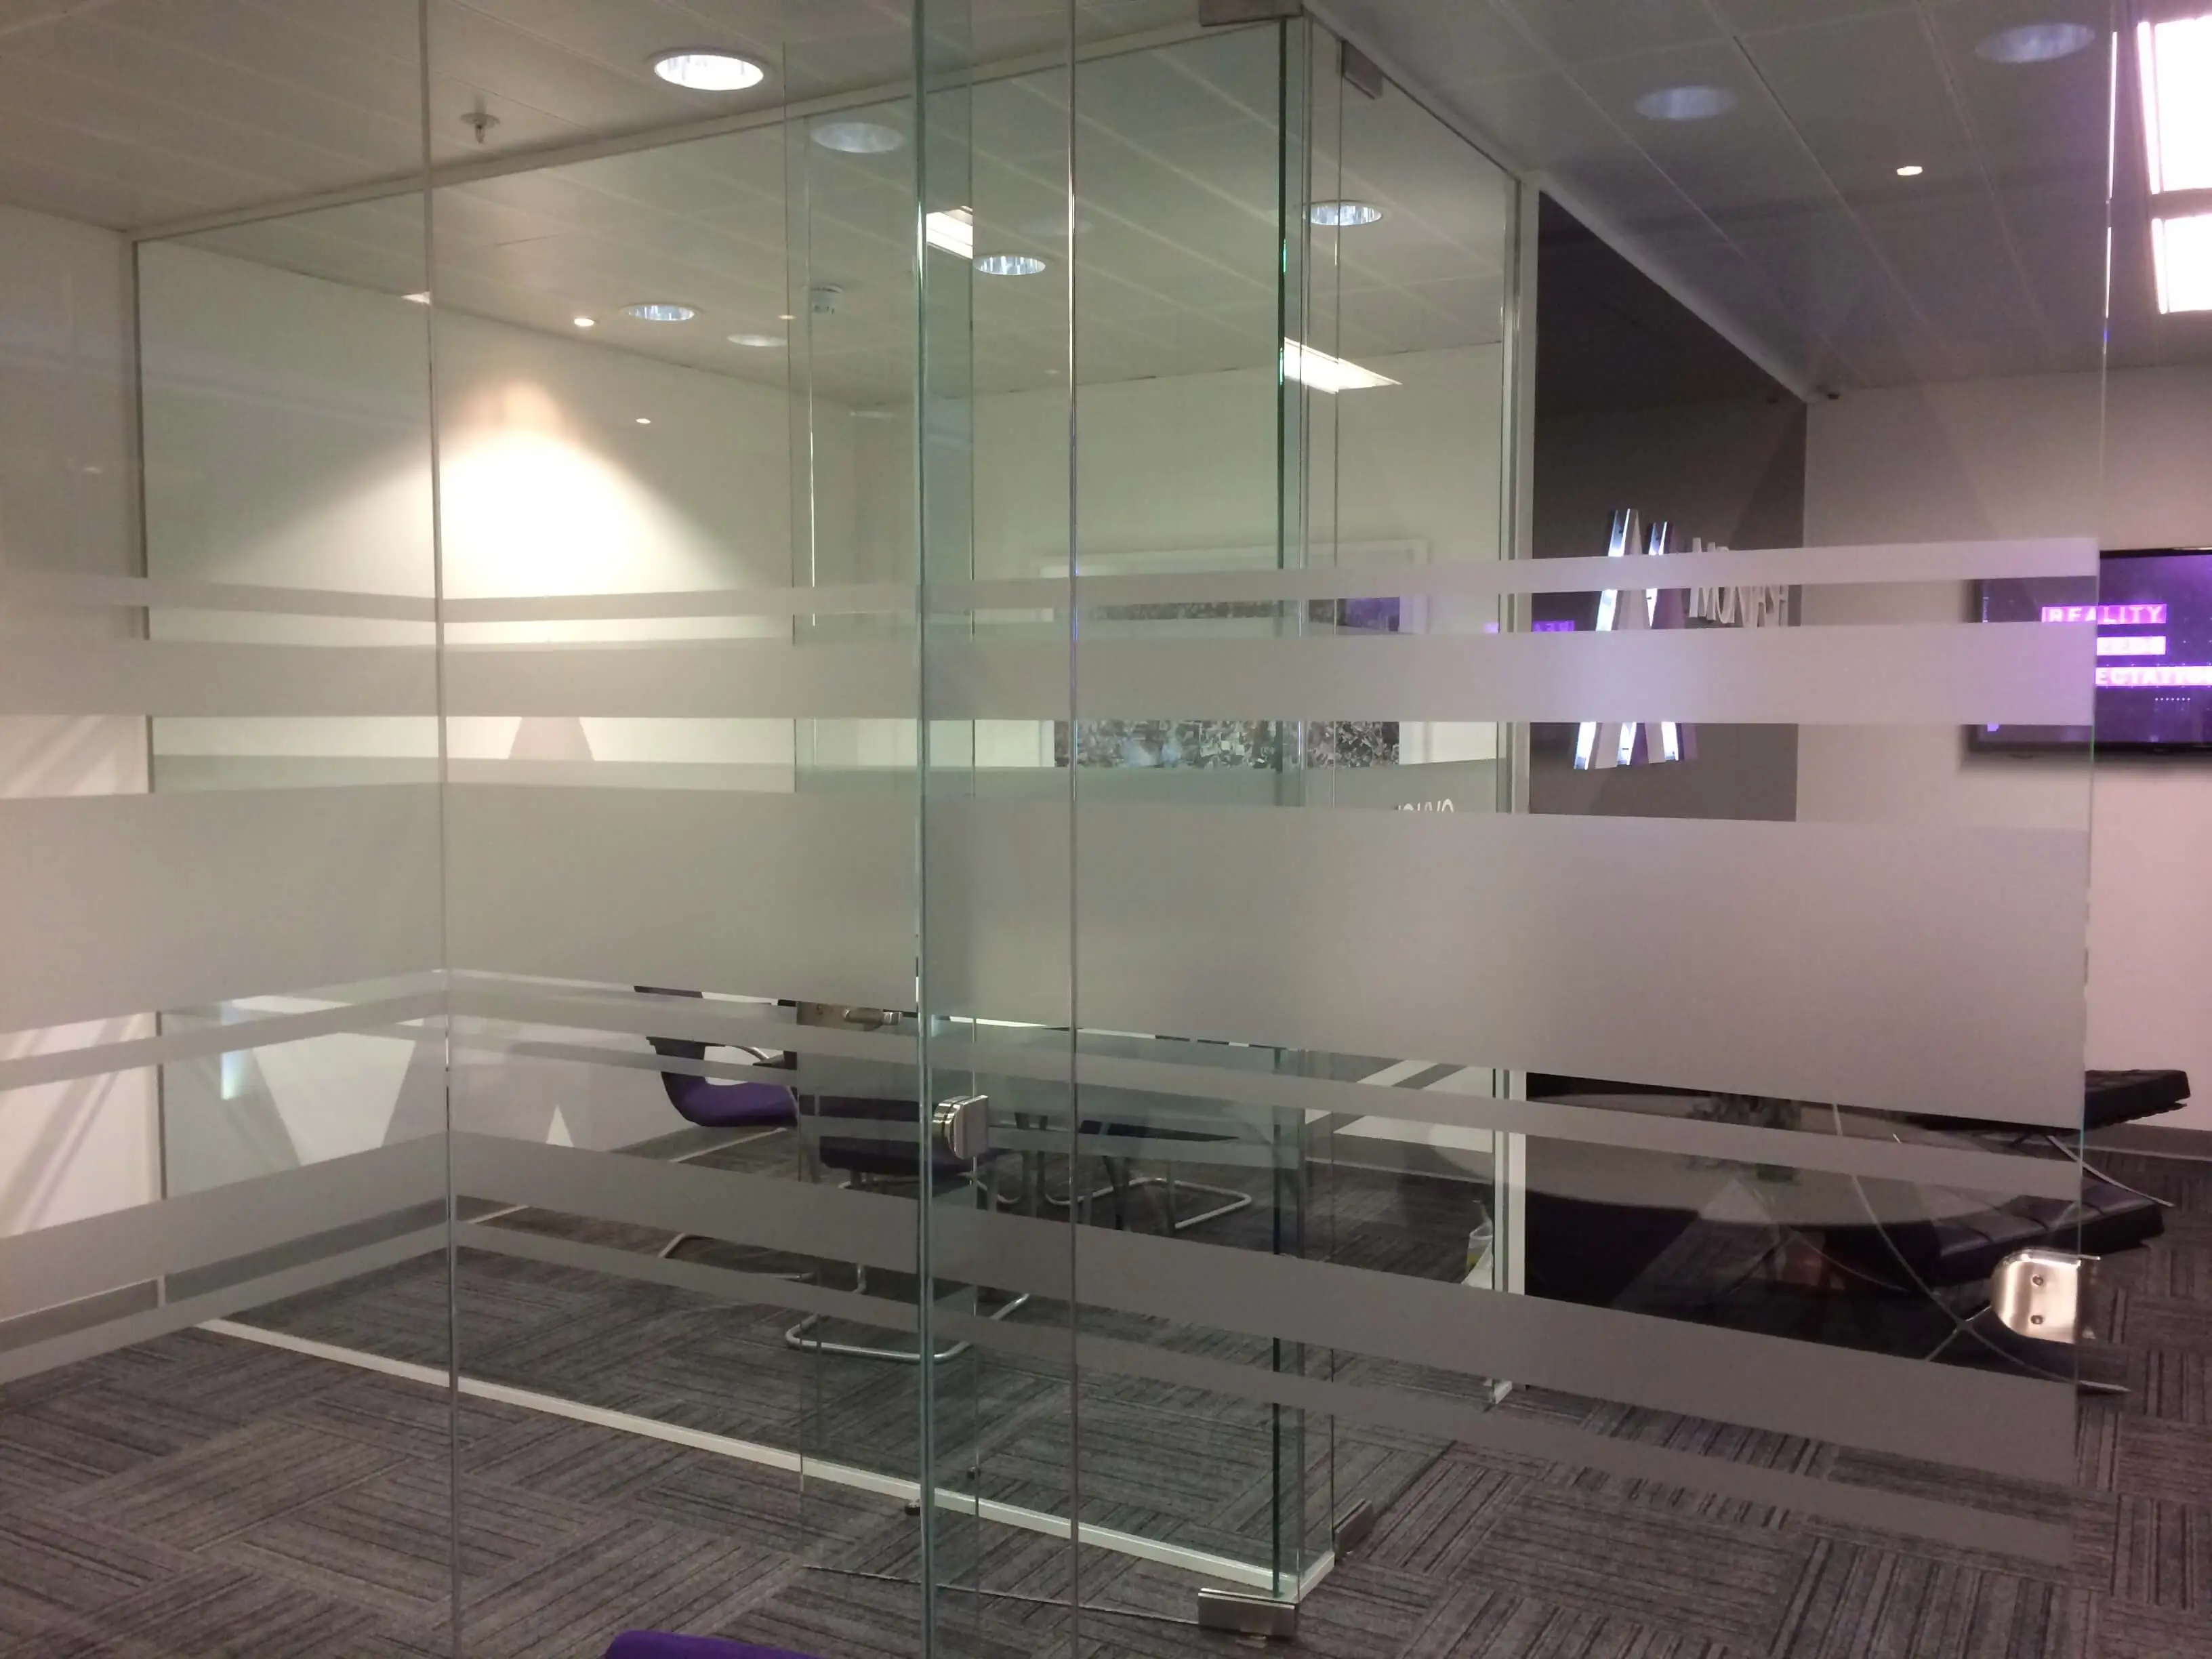 Multiple frameless glass doors and walls for meeting space